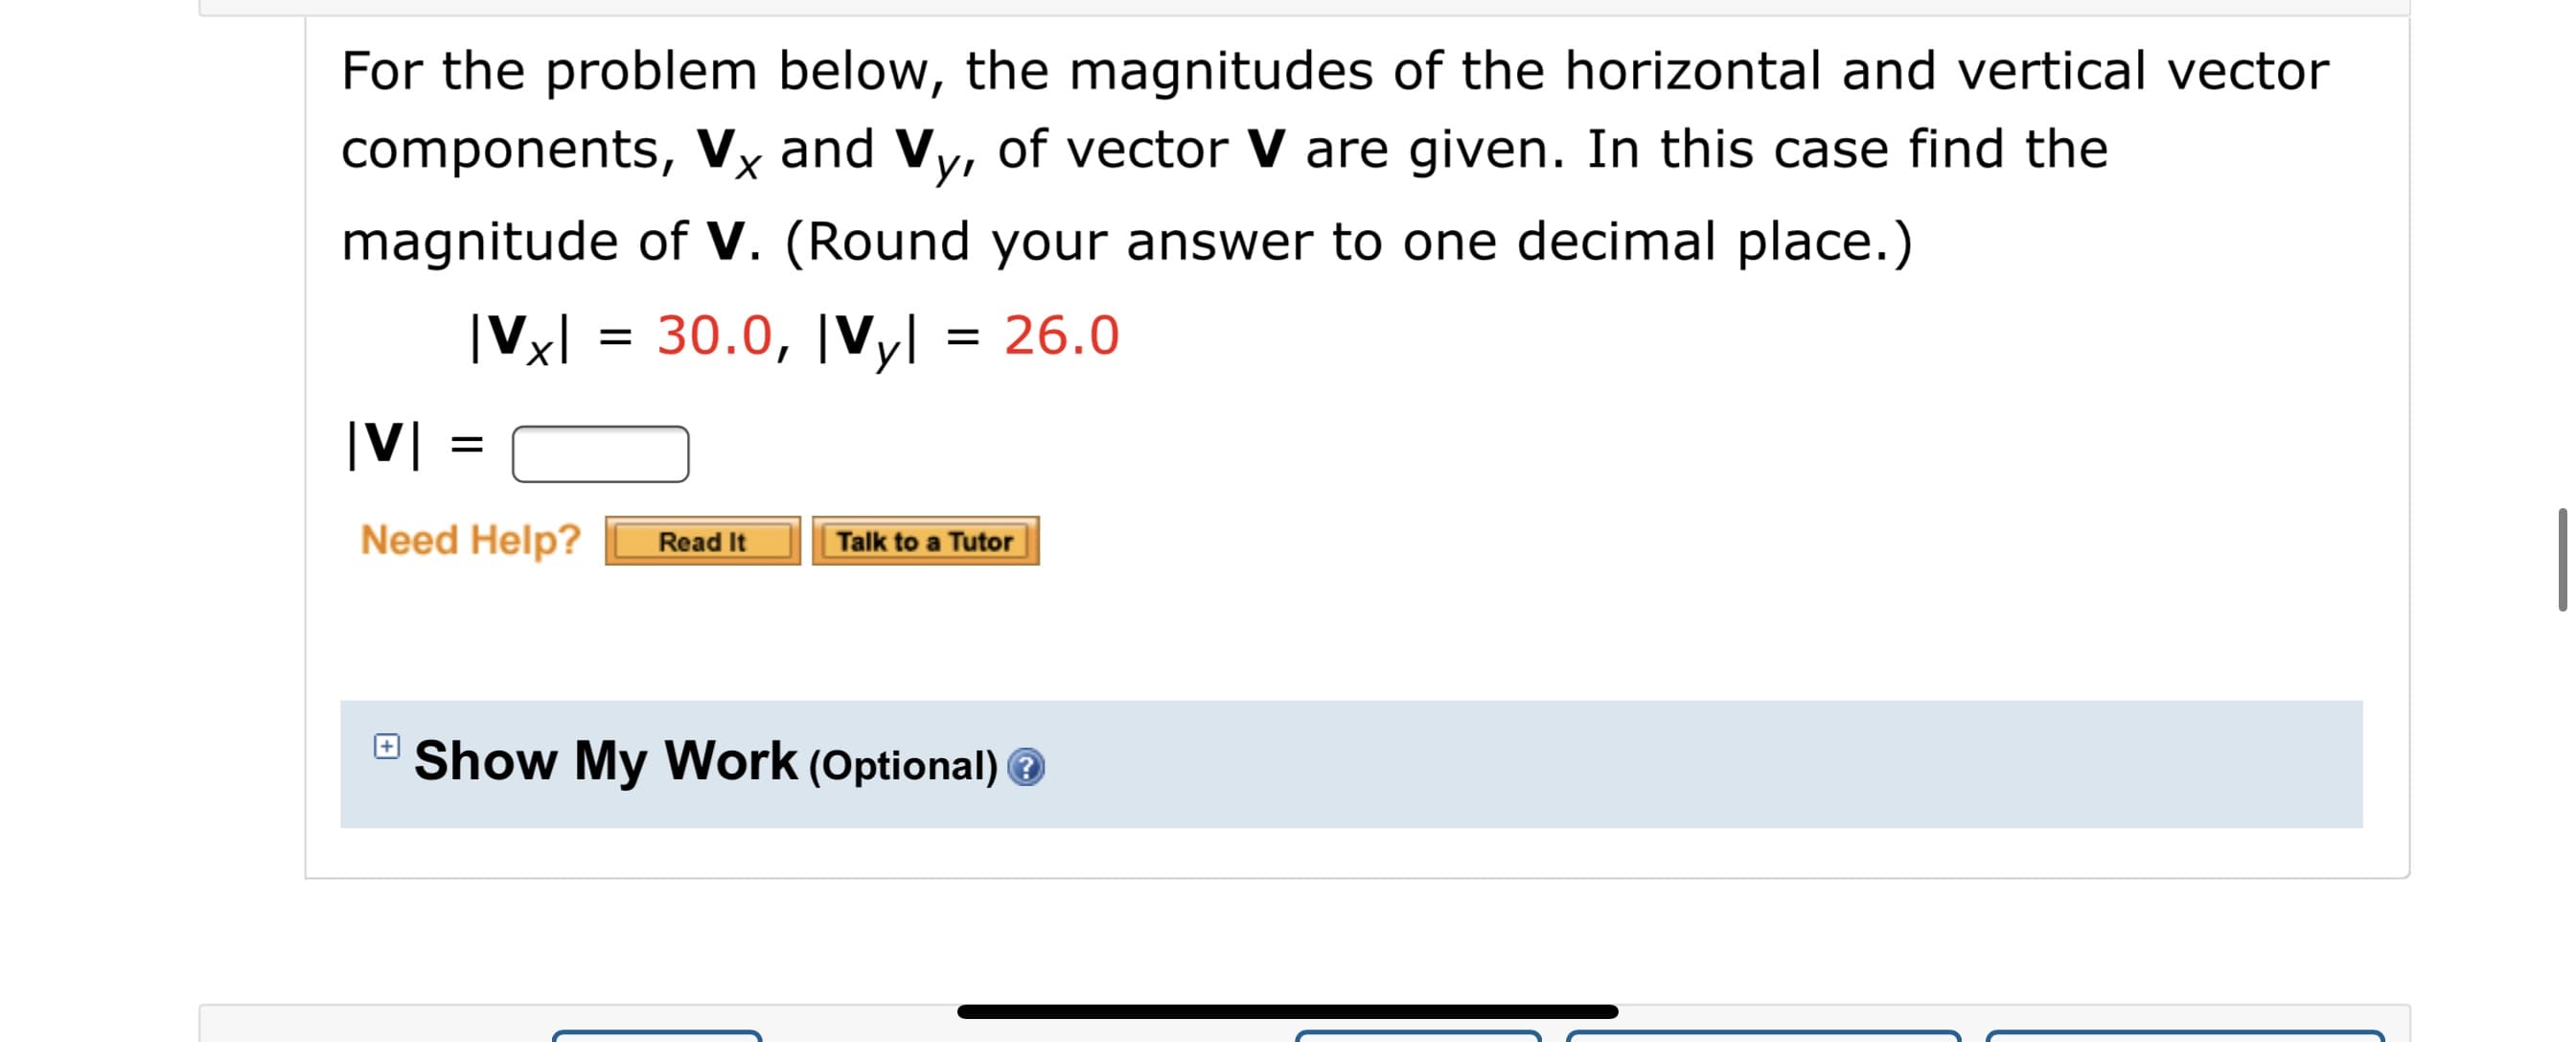 For the problem below, the magnitudes of the horizontal and vertical vector
components, Vỵ and Vy, of vector V are given. In this case find the
magnitude of V. (Round your answer to one decimal place.)
|Vxl = 30.0, |Vyl = 26.0
Need Help?
Talk to a Tutor
Read It
